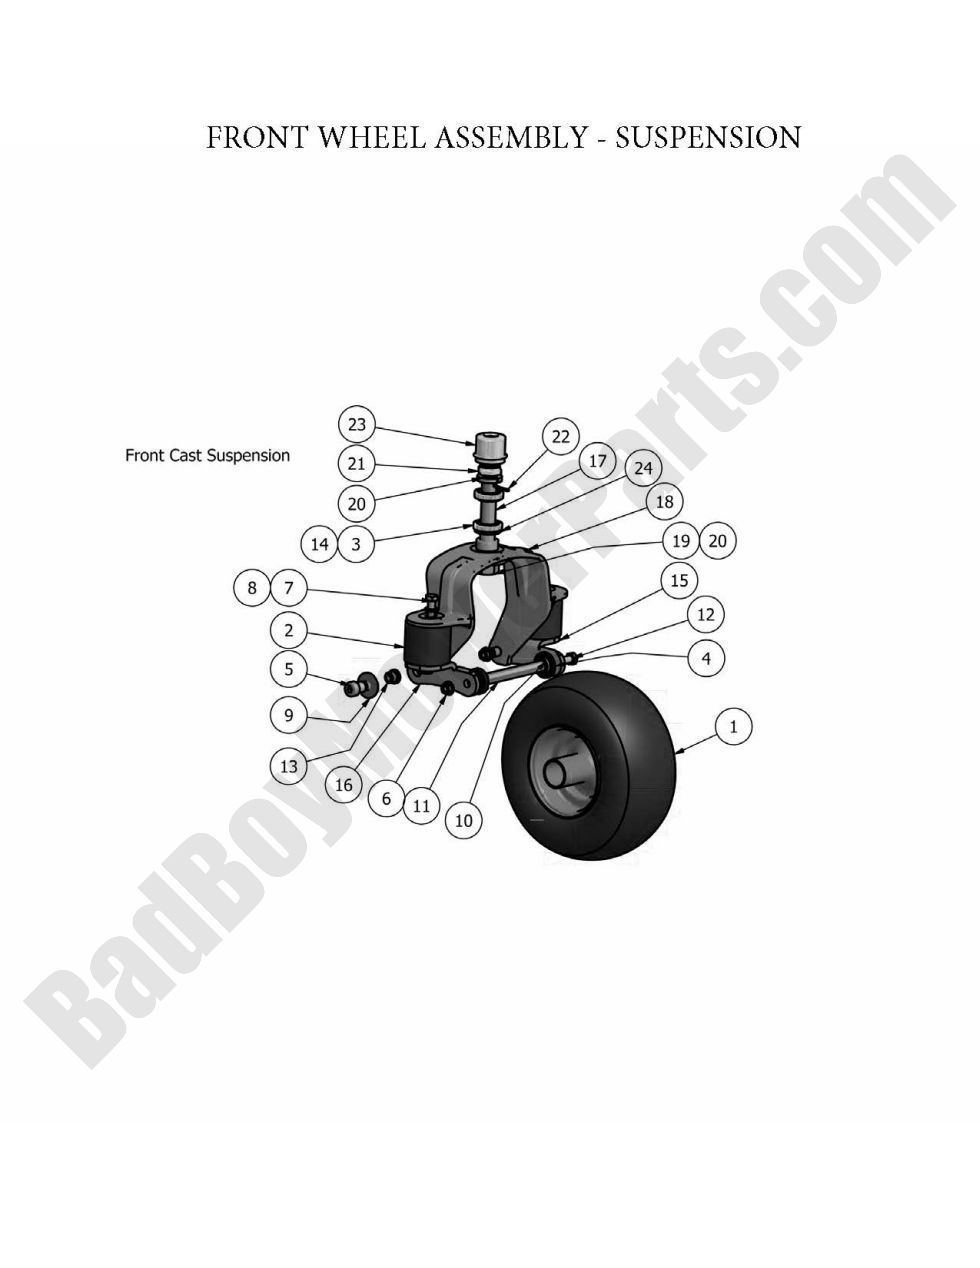 2010 Compact Diesel Front Wheel Assembly